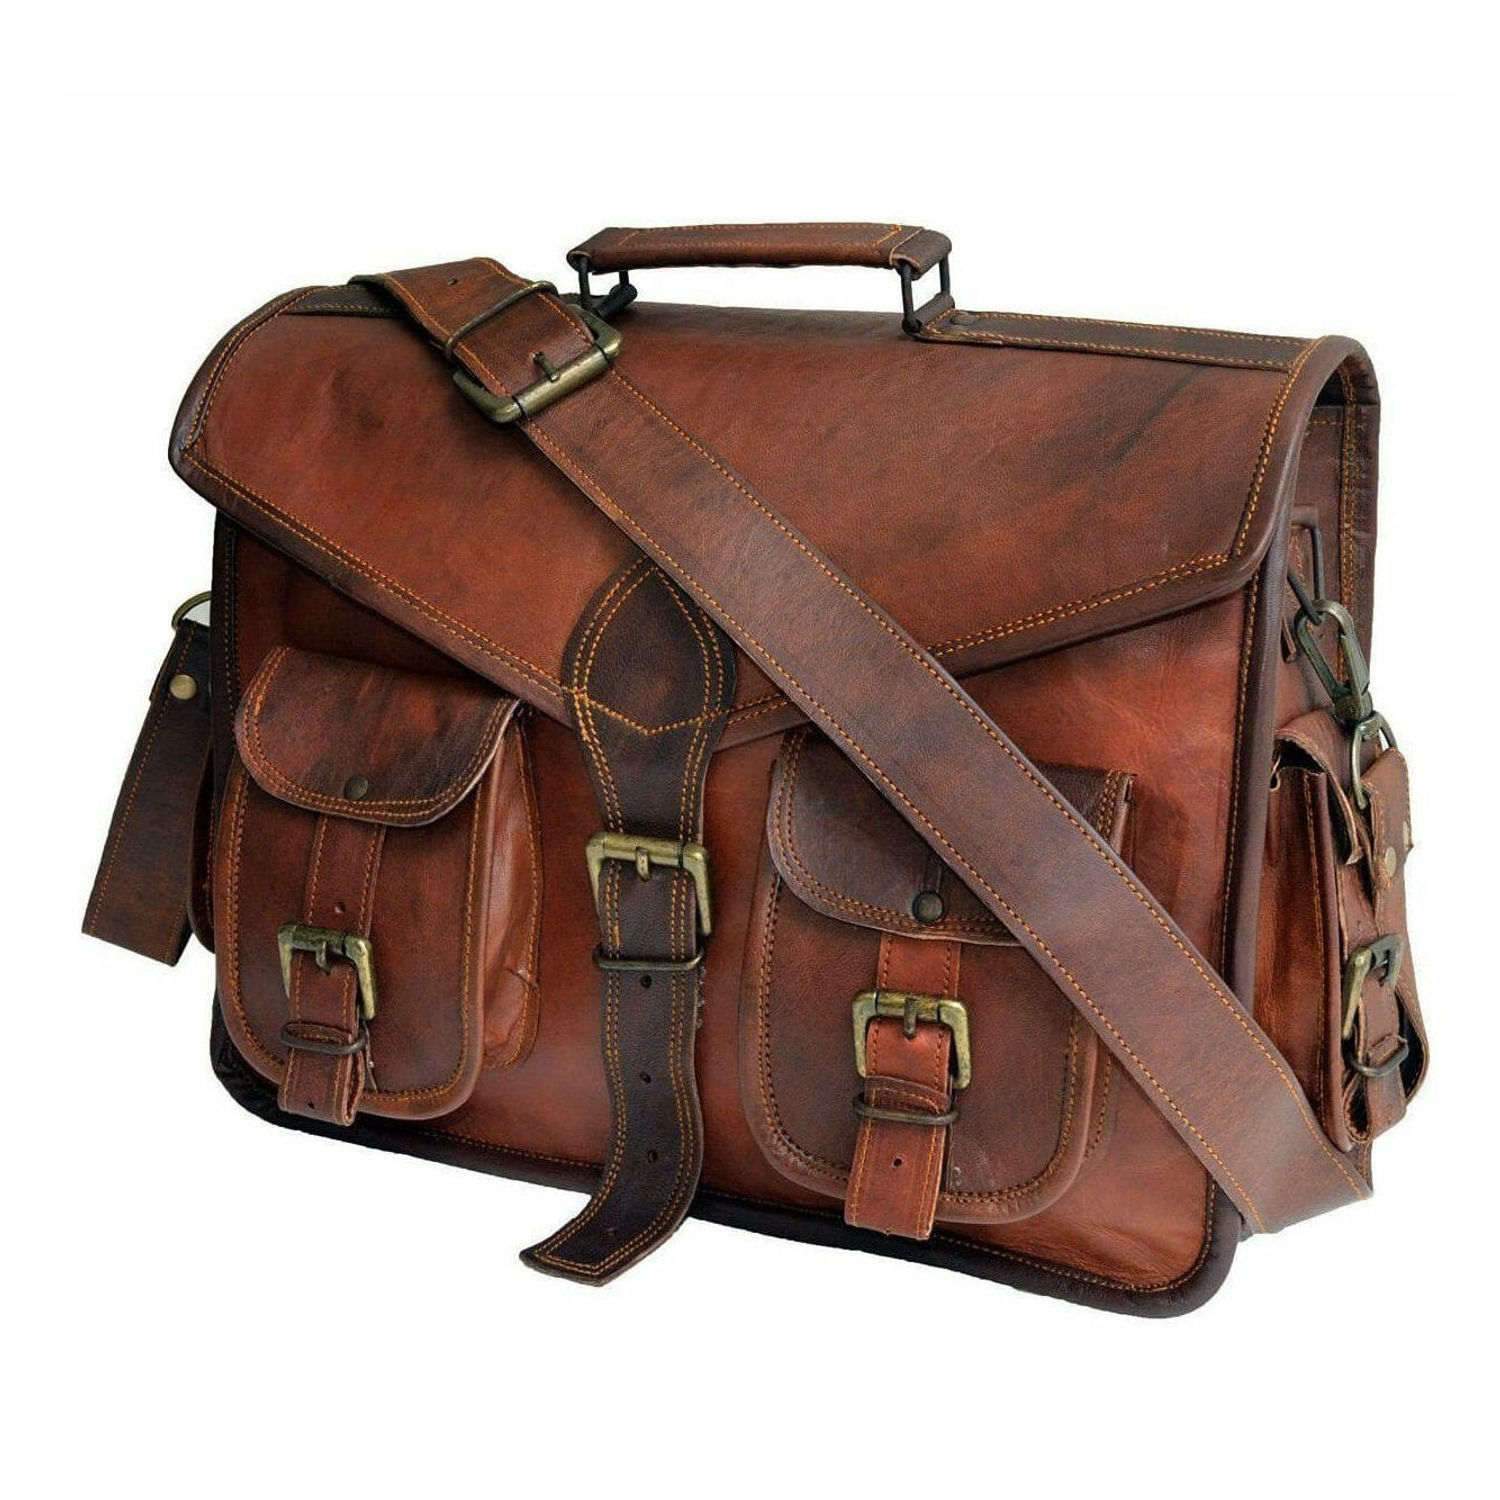 Top Rated Brown Leather Messenger Briefcase Bag | Quvom.com